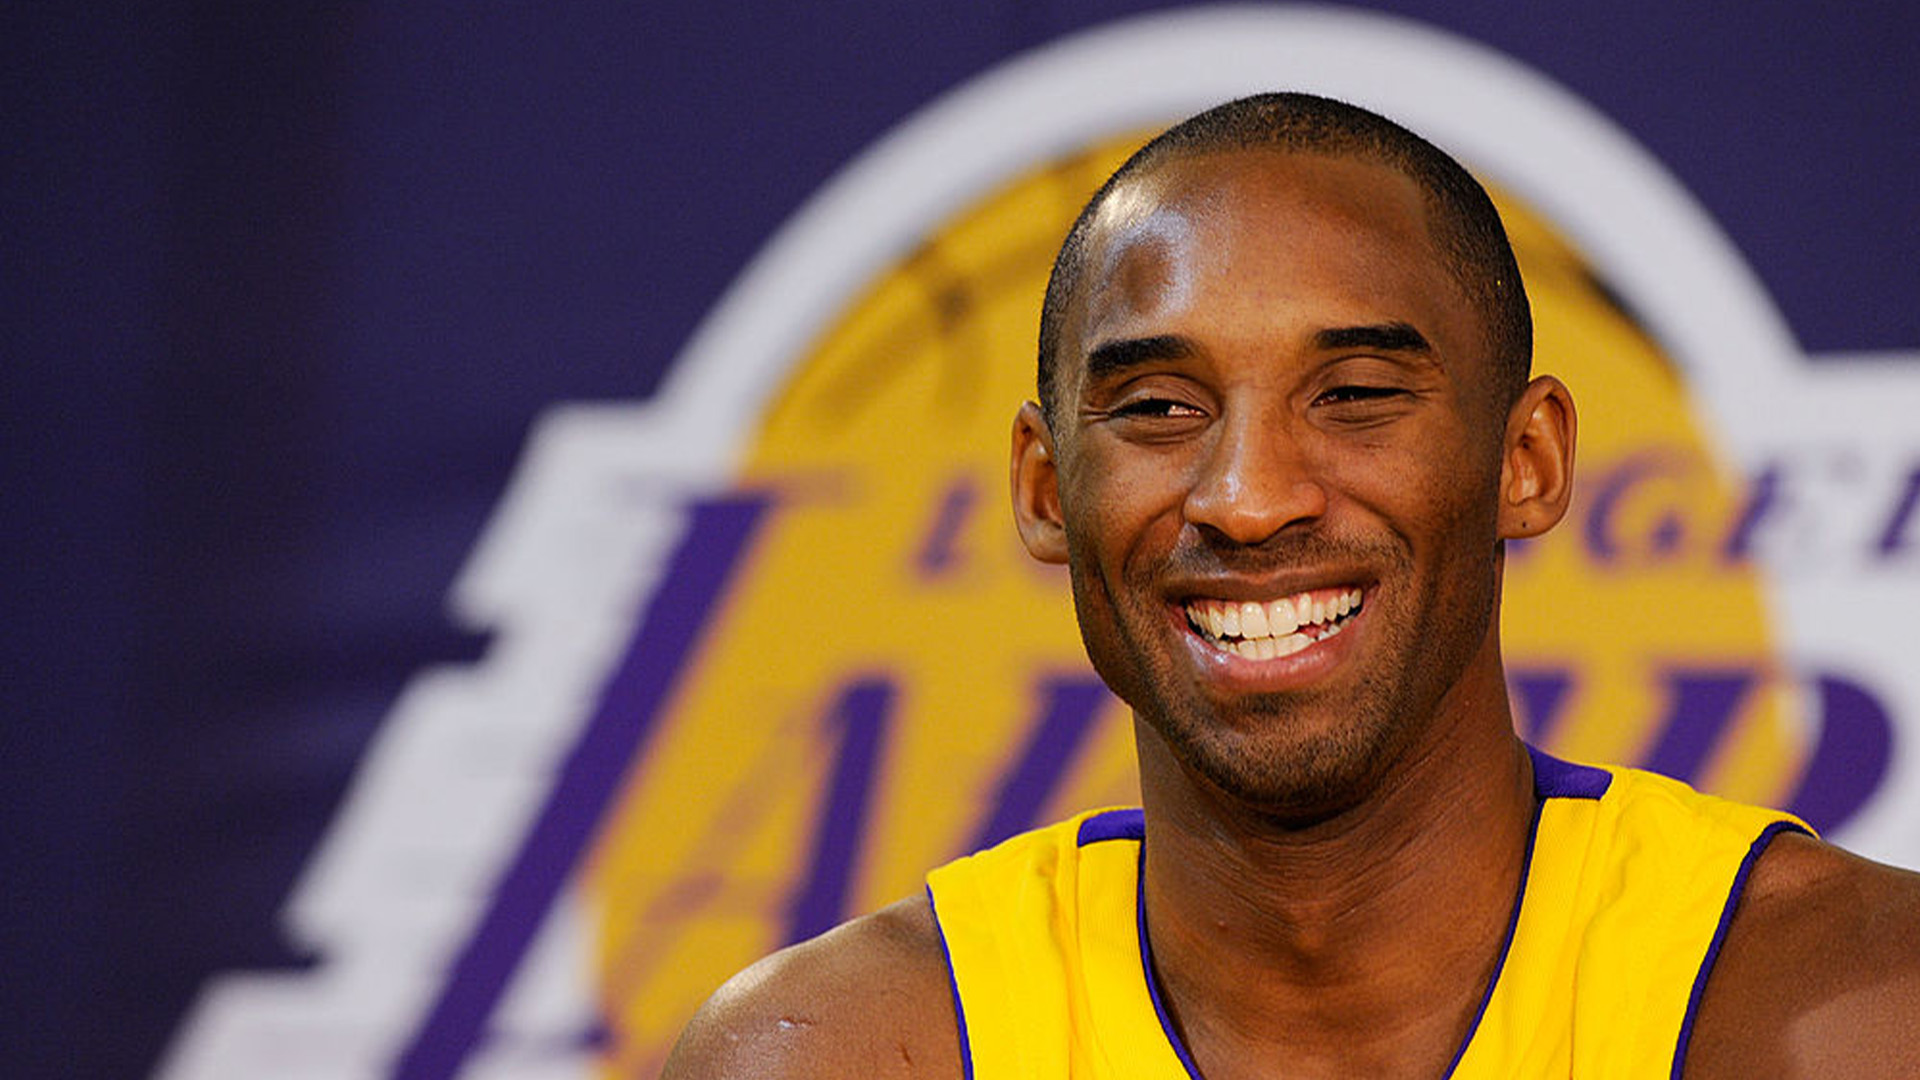 Jersey Worn By The Late Kobe Bryant Could Be Auctioned For Up To $7M